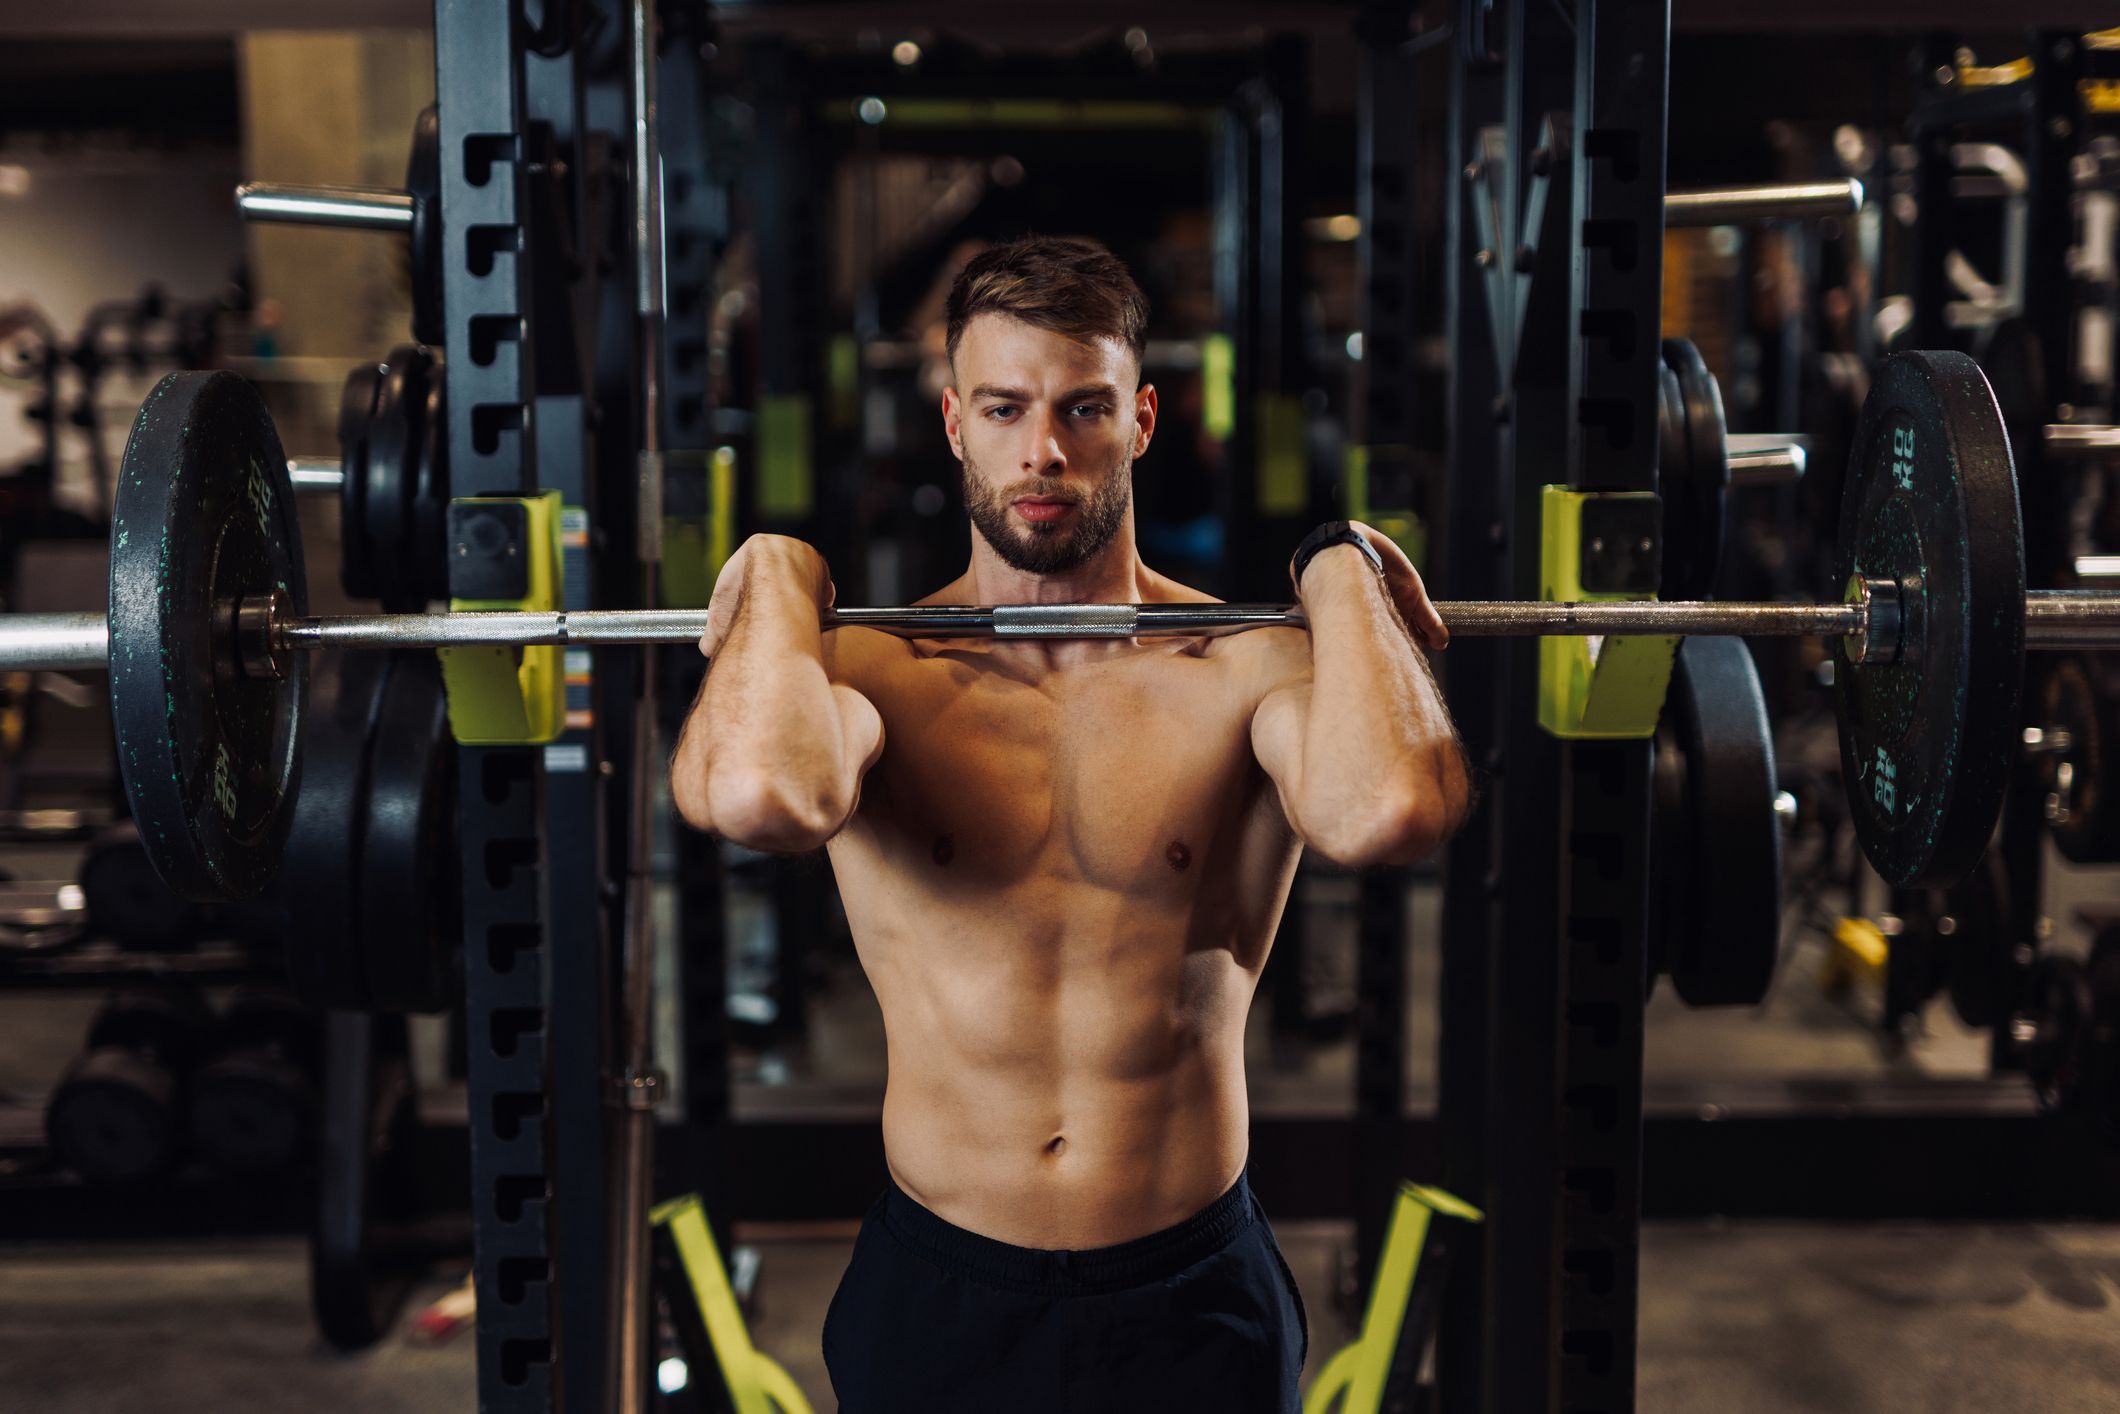 Compound Lifting: 10 Exercises To Build Strength – Fitbod